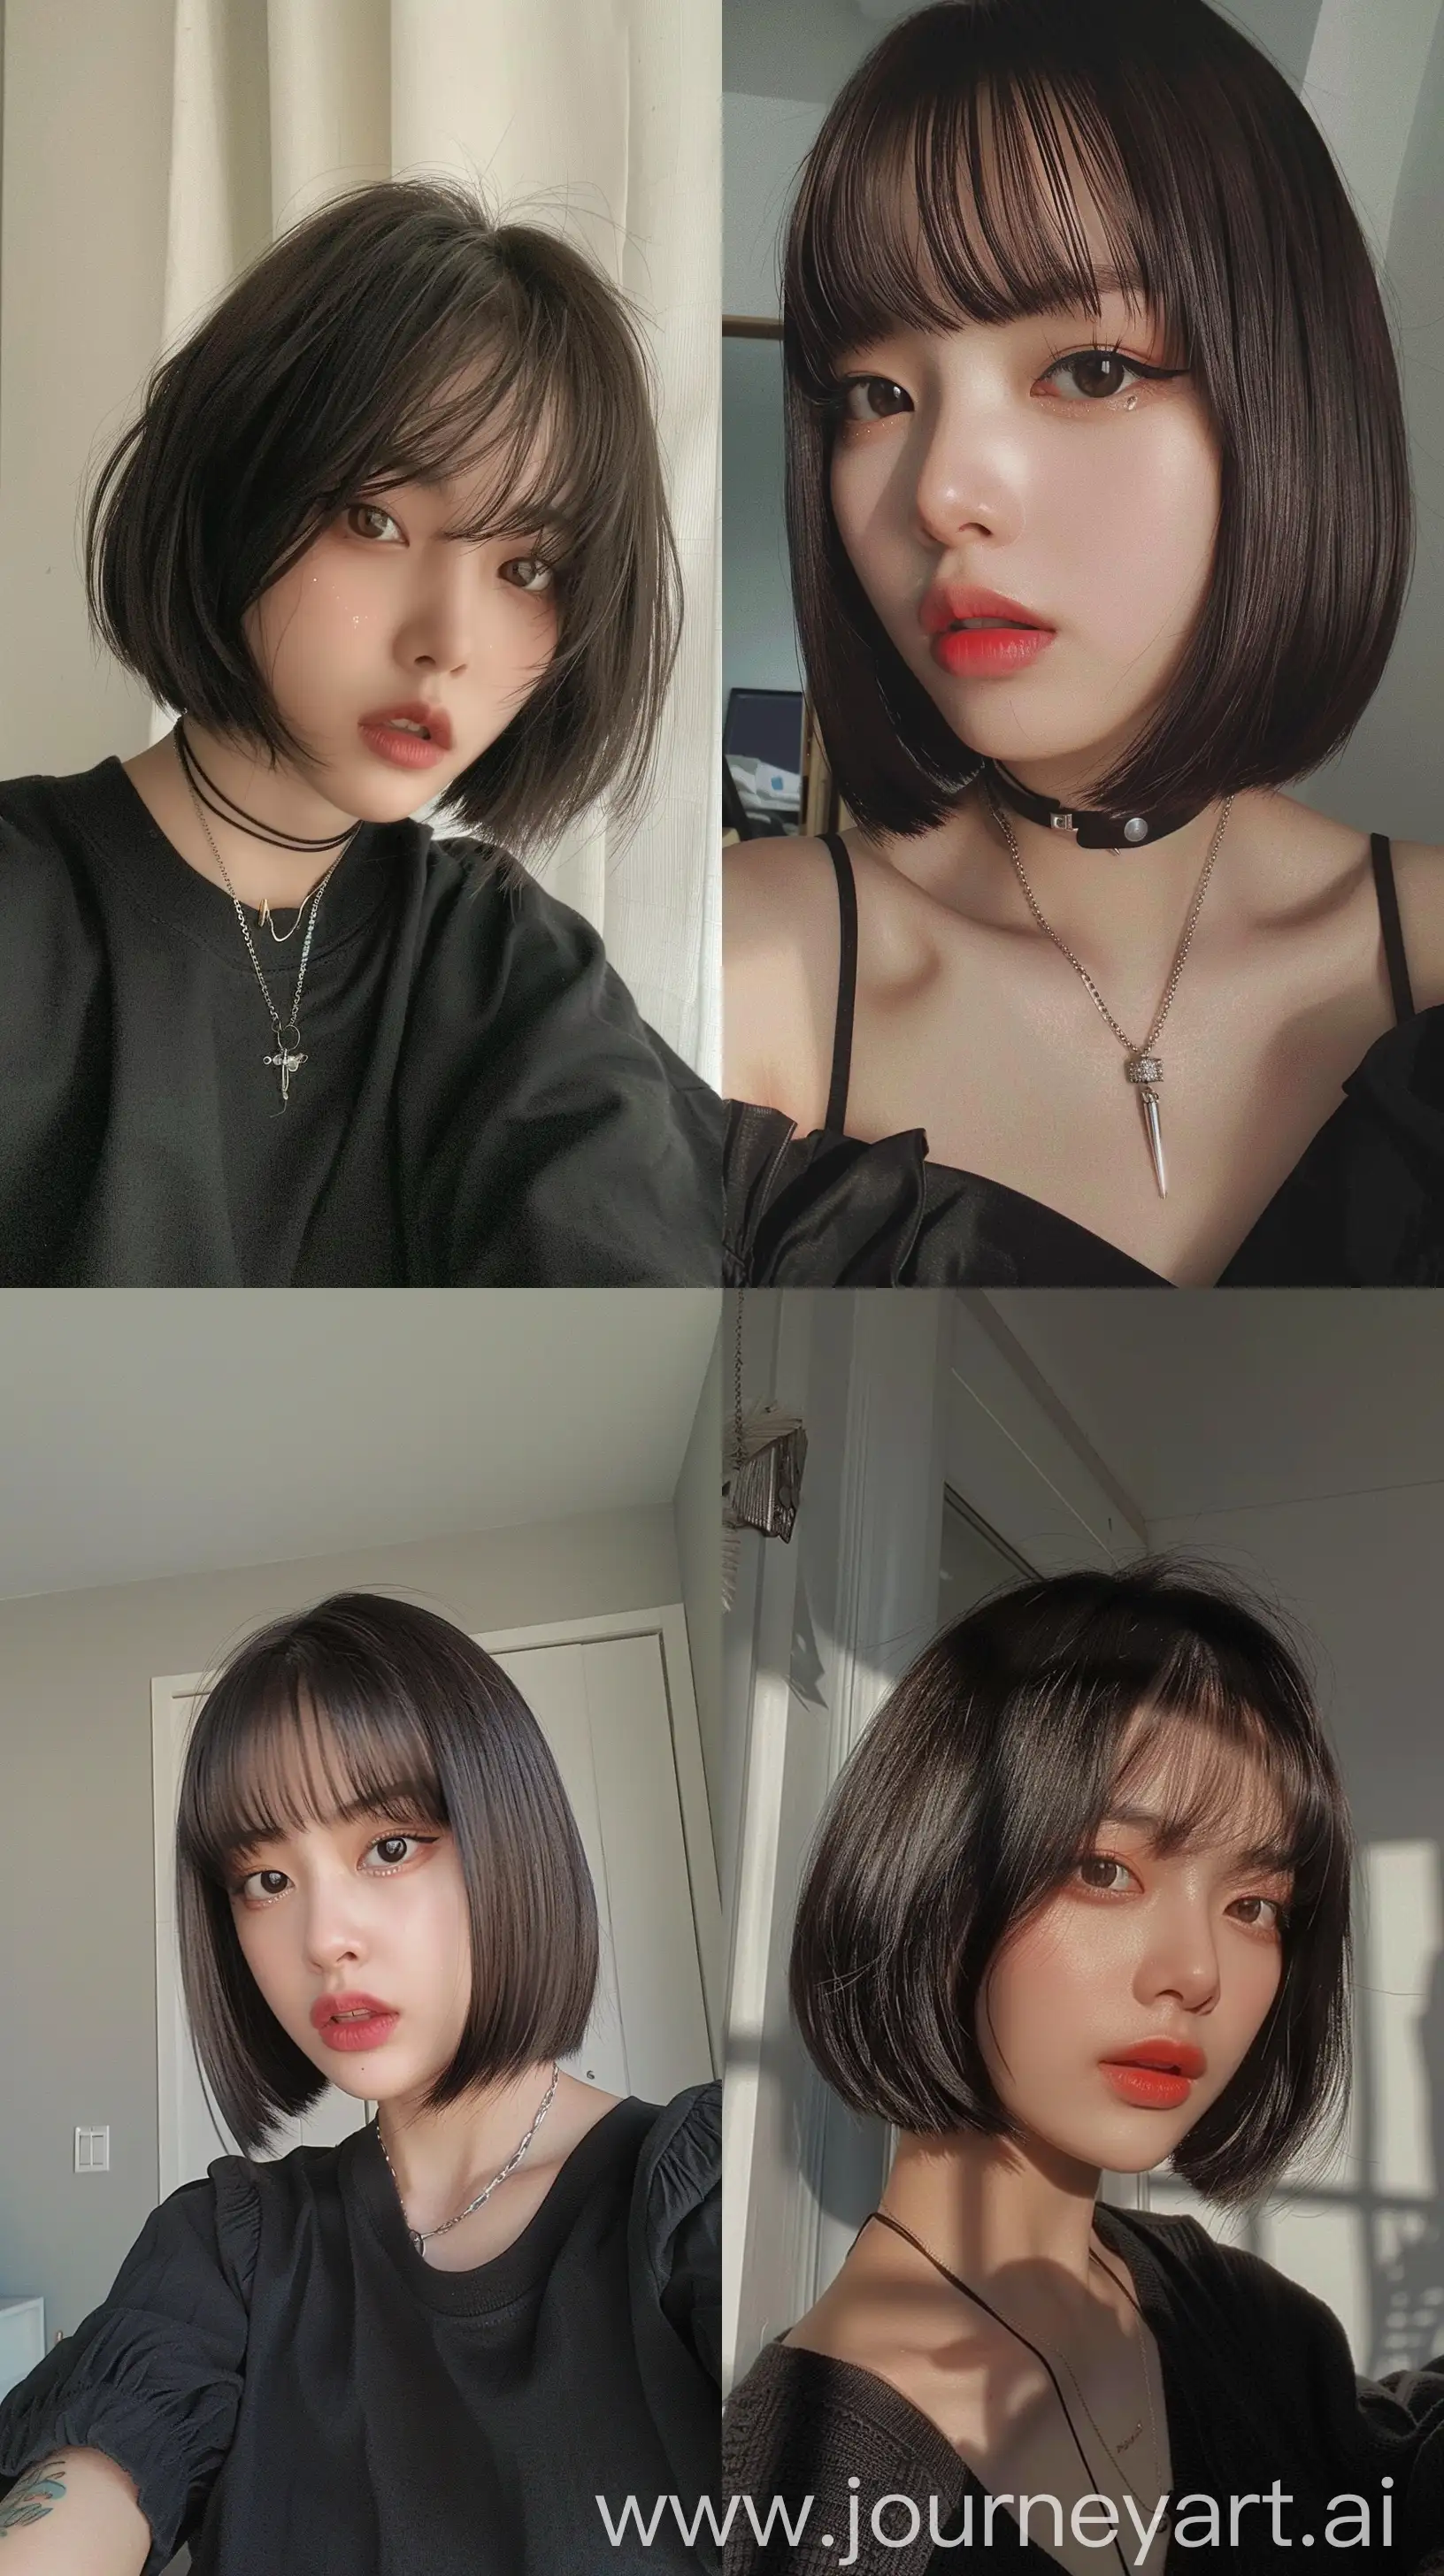 Aesthetic-Selfie-of-a-Cute-Korean-Girl-with-Bob-Hair-and-JennieInspired-Makeup